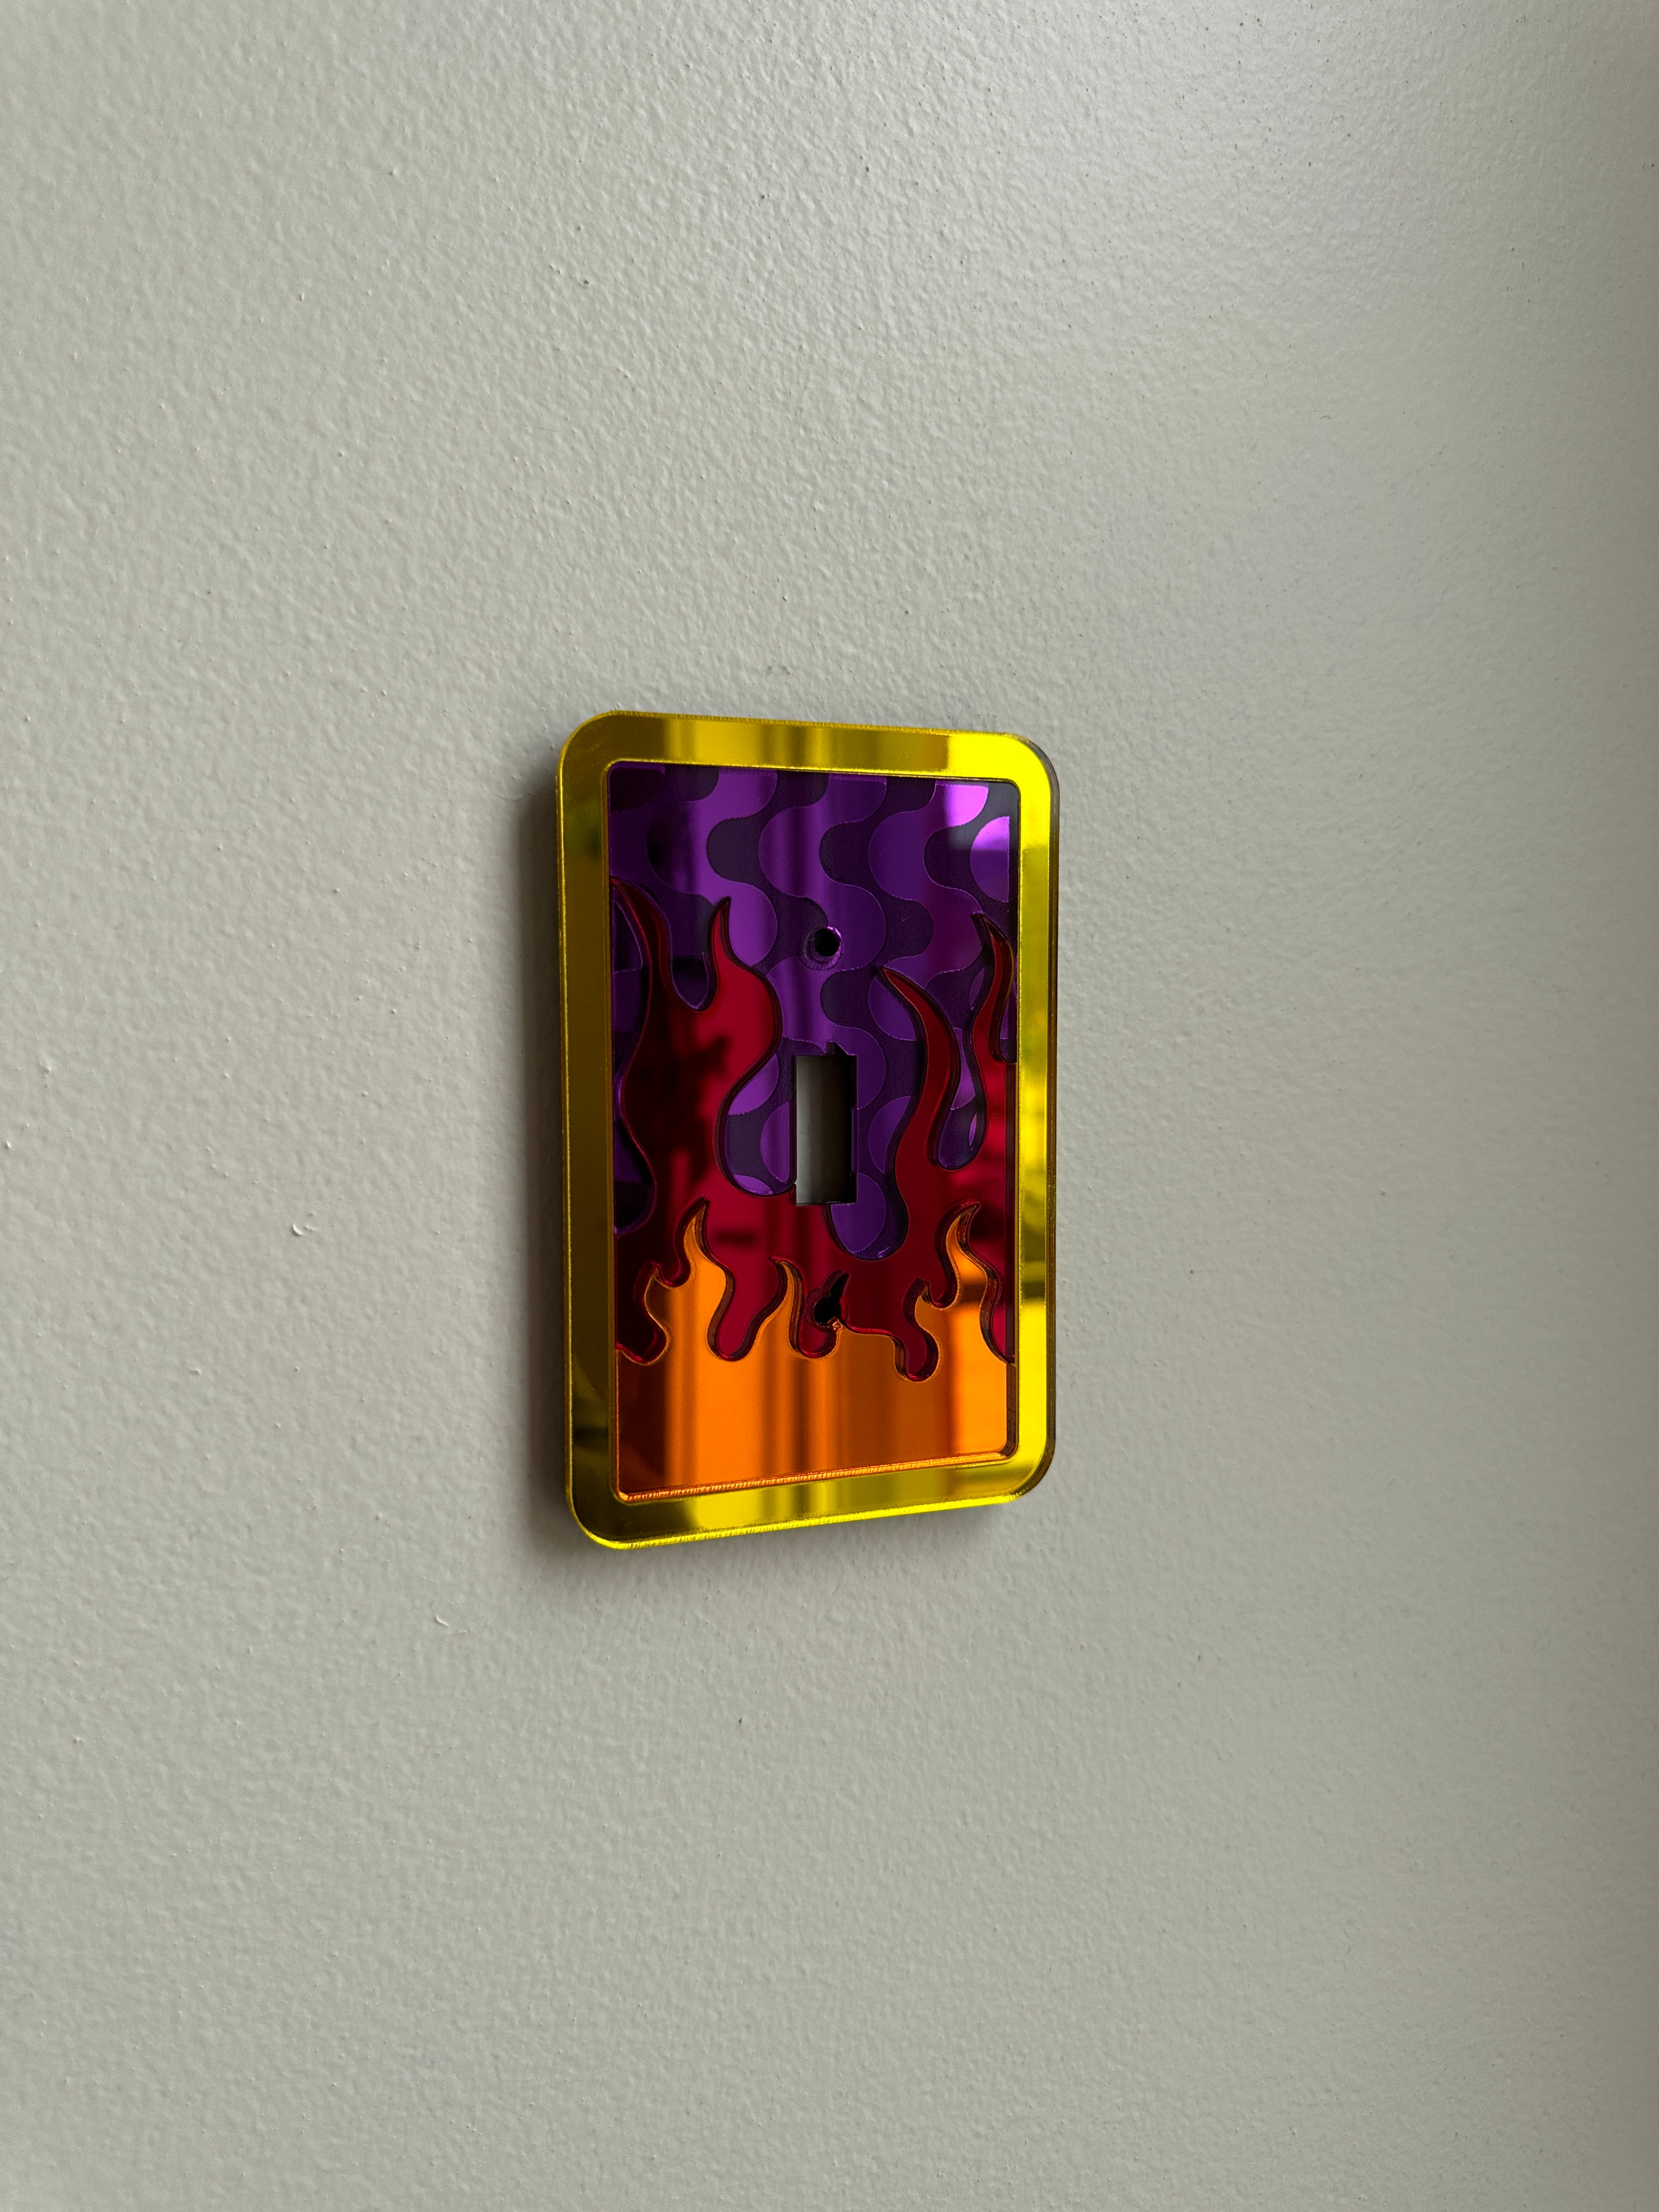 Mirror Flaming Light Switch Sample Sale